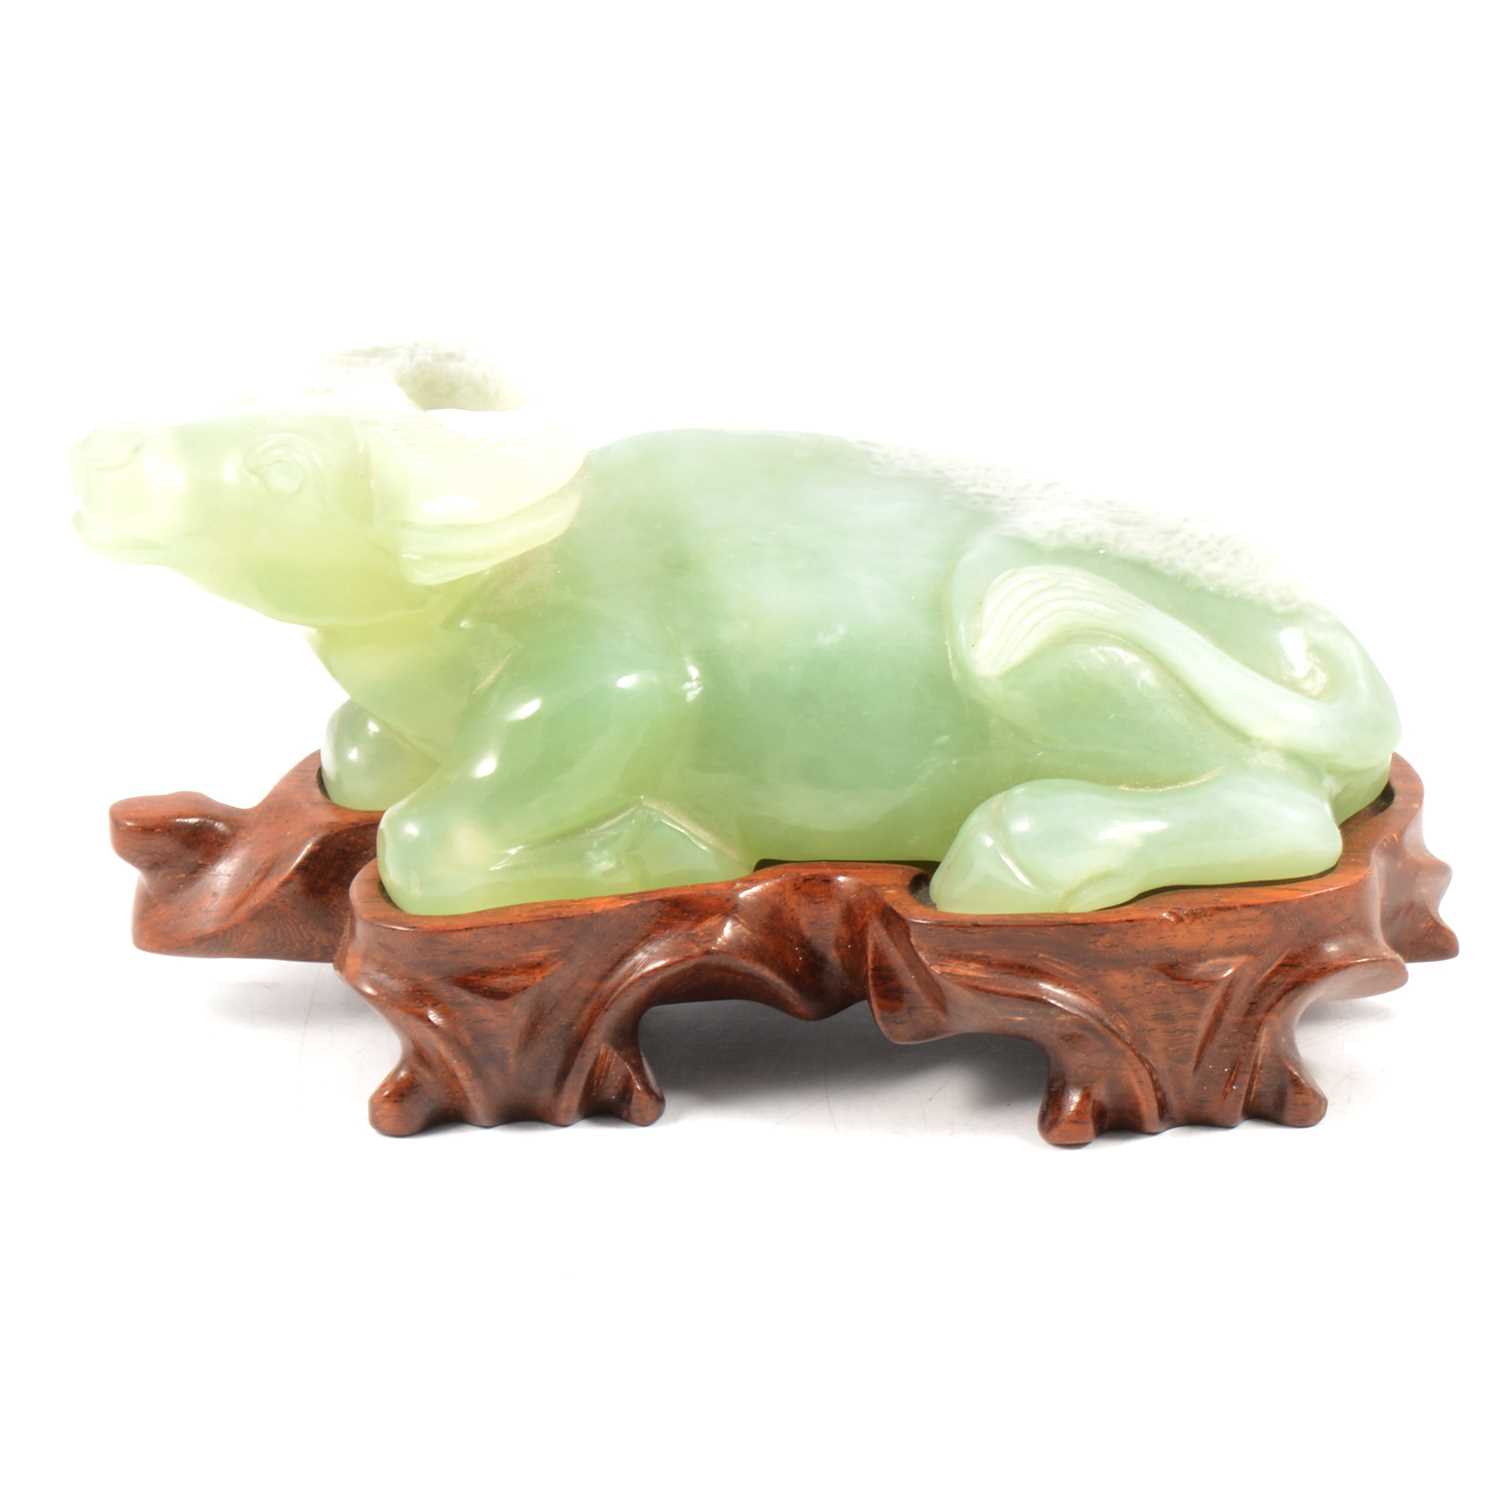 Chinese carved Jade-style figure of a reclining water buffalo, on stand